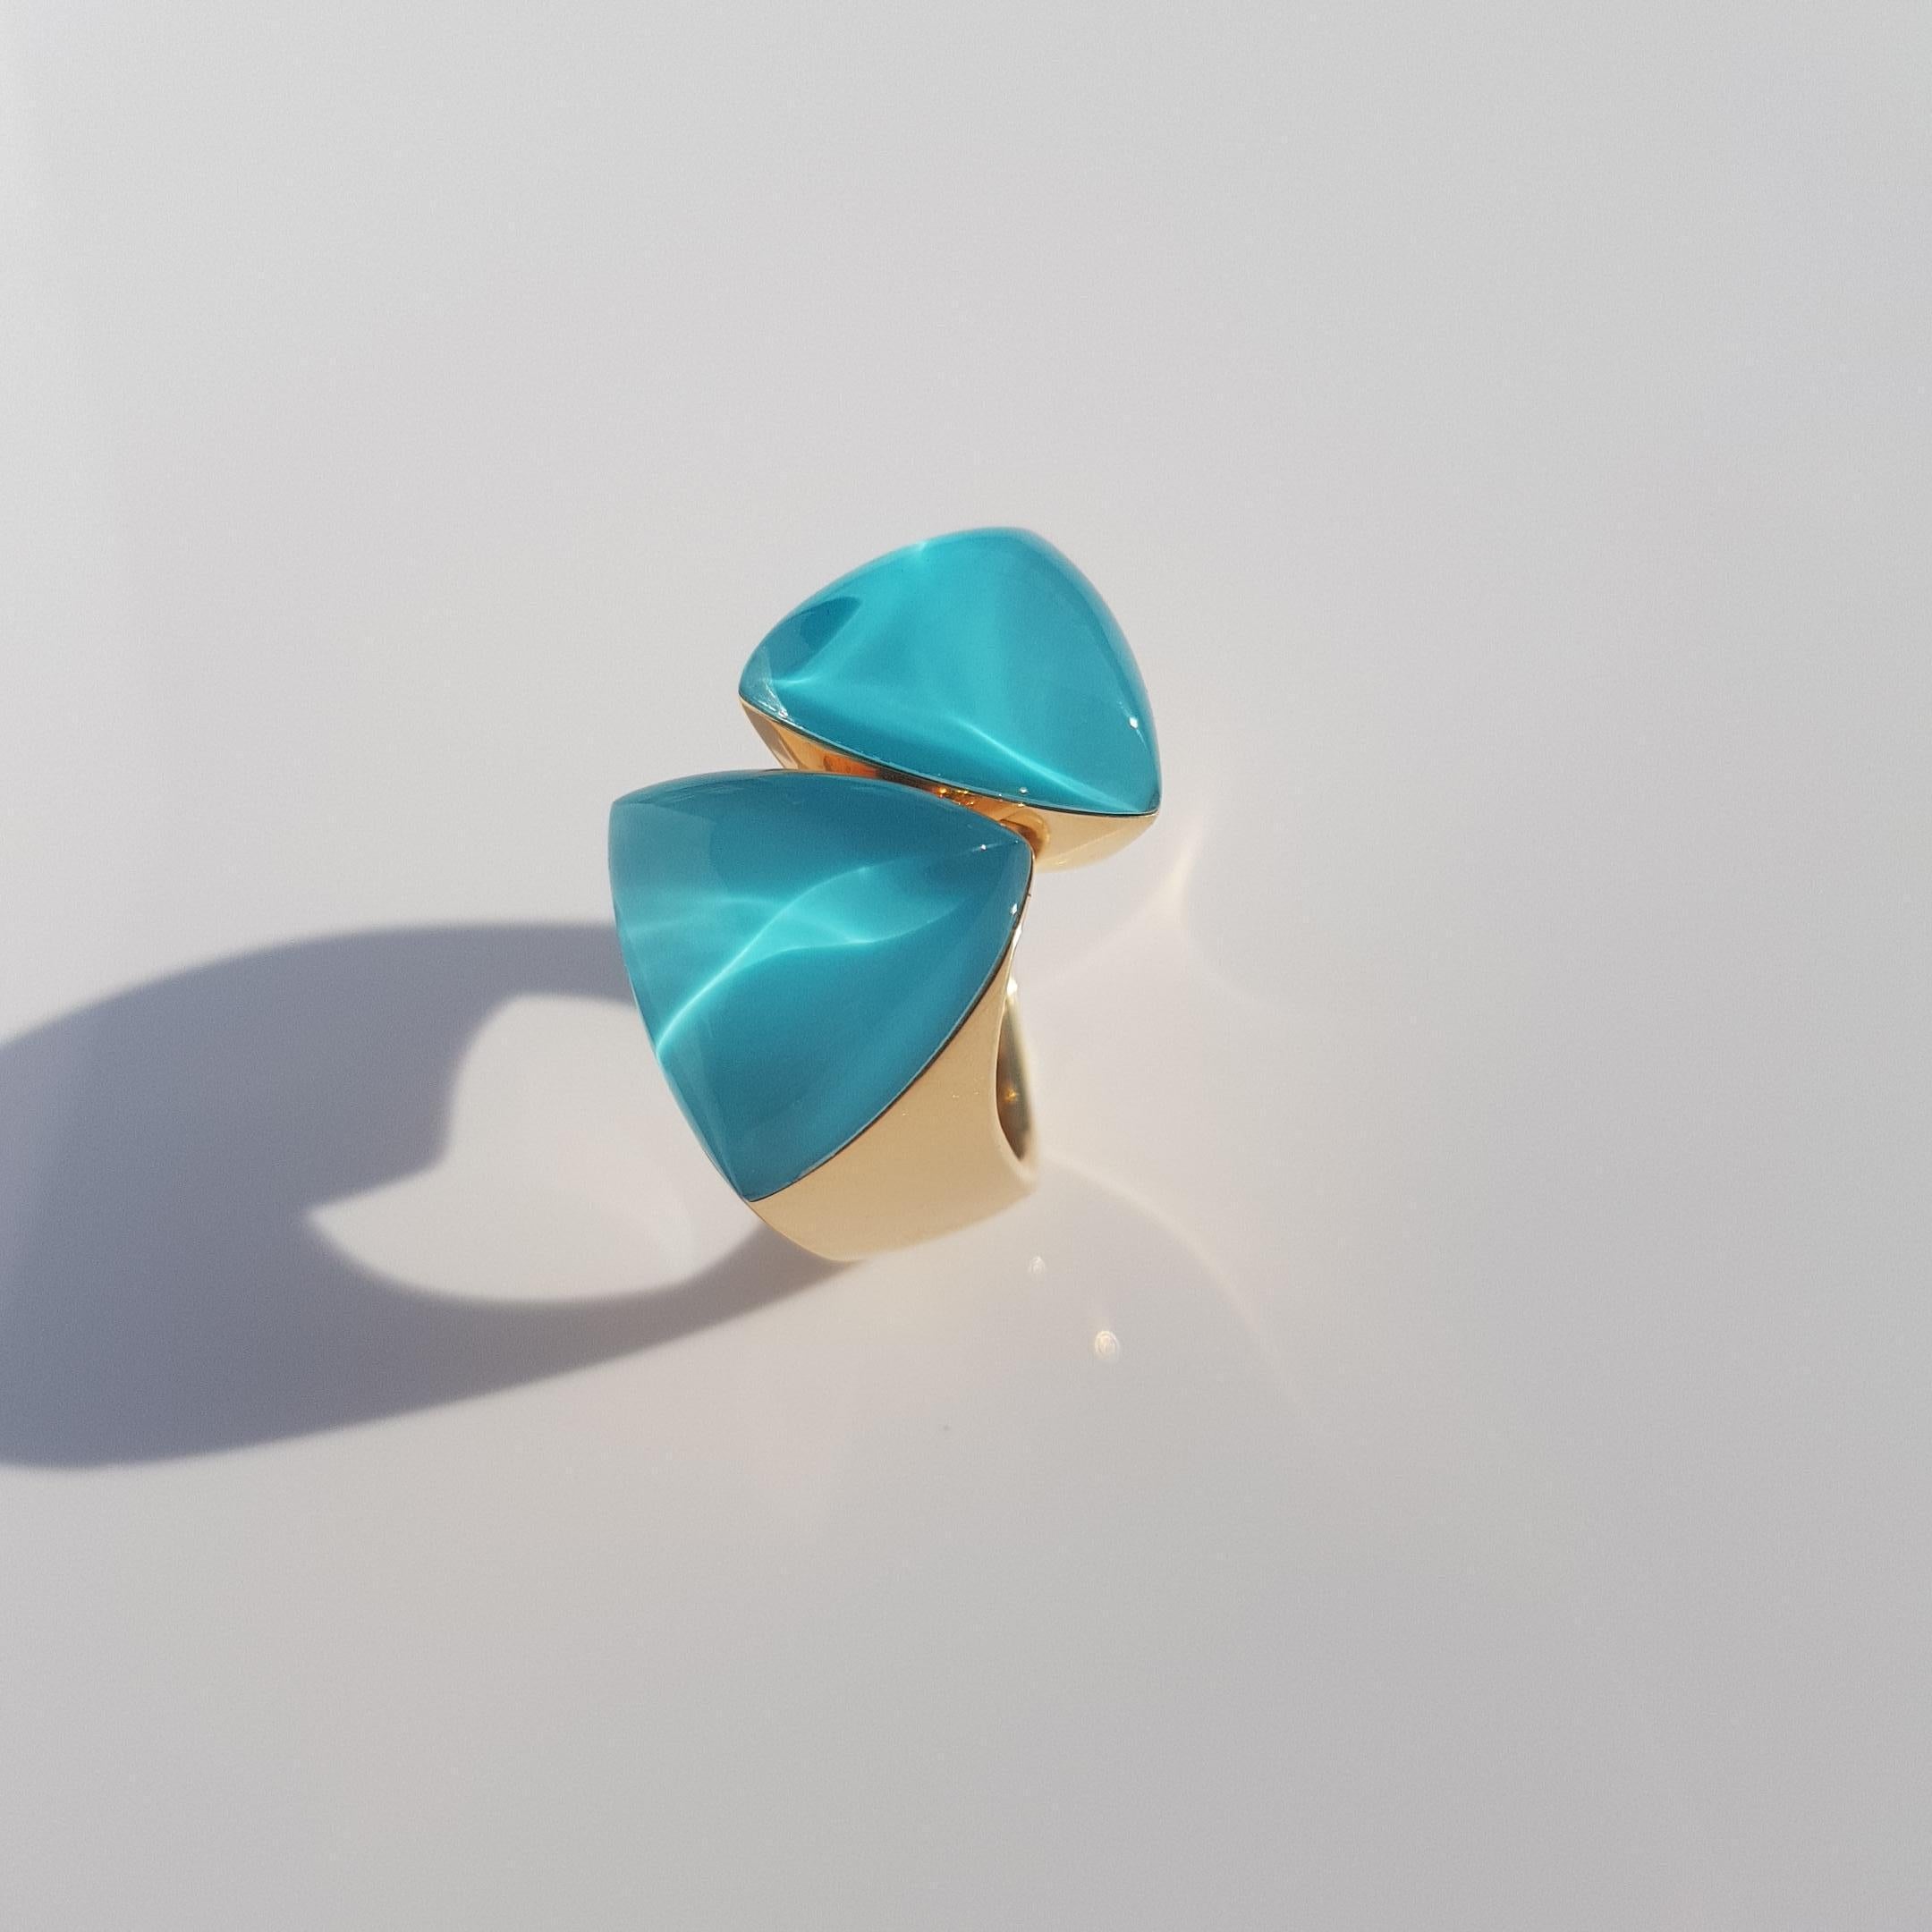 Vhernier Freccia ring, composed out of a wide band in 18KT rose gold, adorned in the centre with a plate of turquoise and a cabochon rock crystal. The stunning blue of the turquoise adds a pop of colour and is given some sparkle by the magnificent